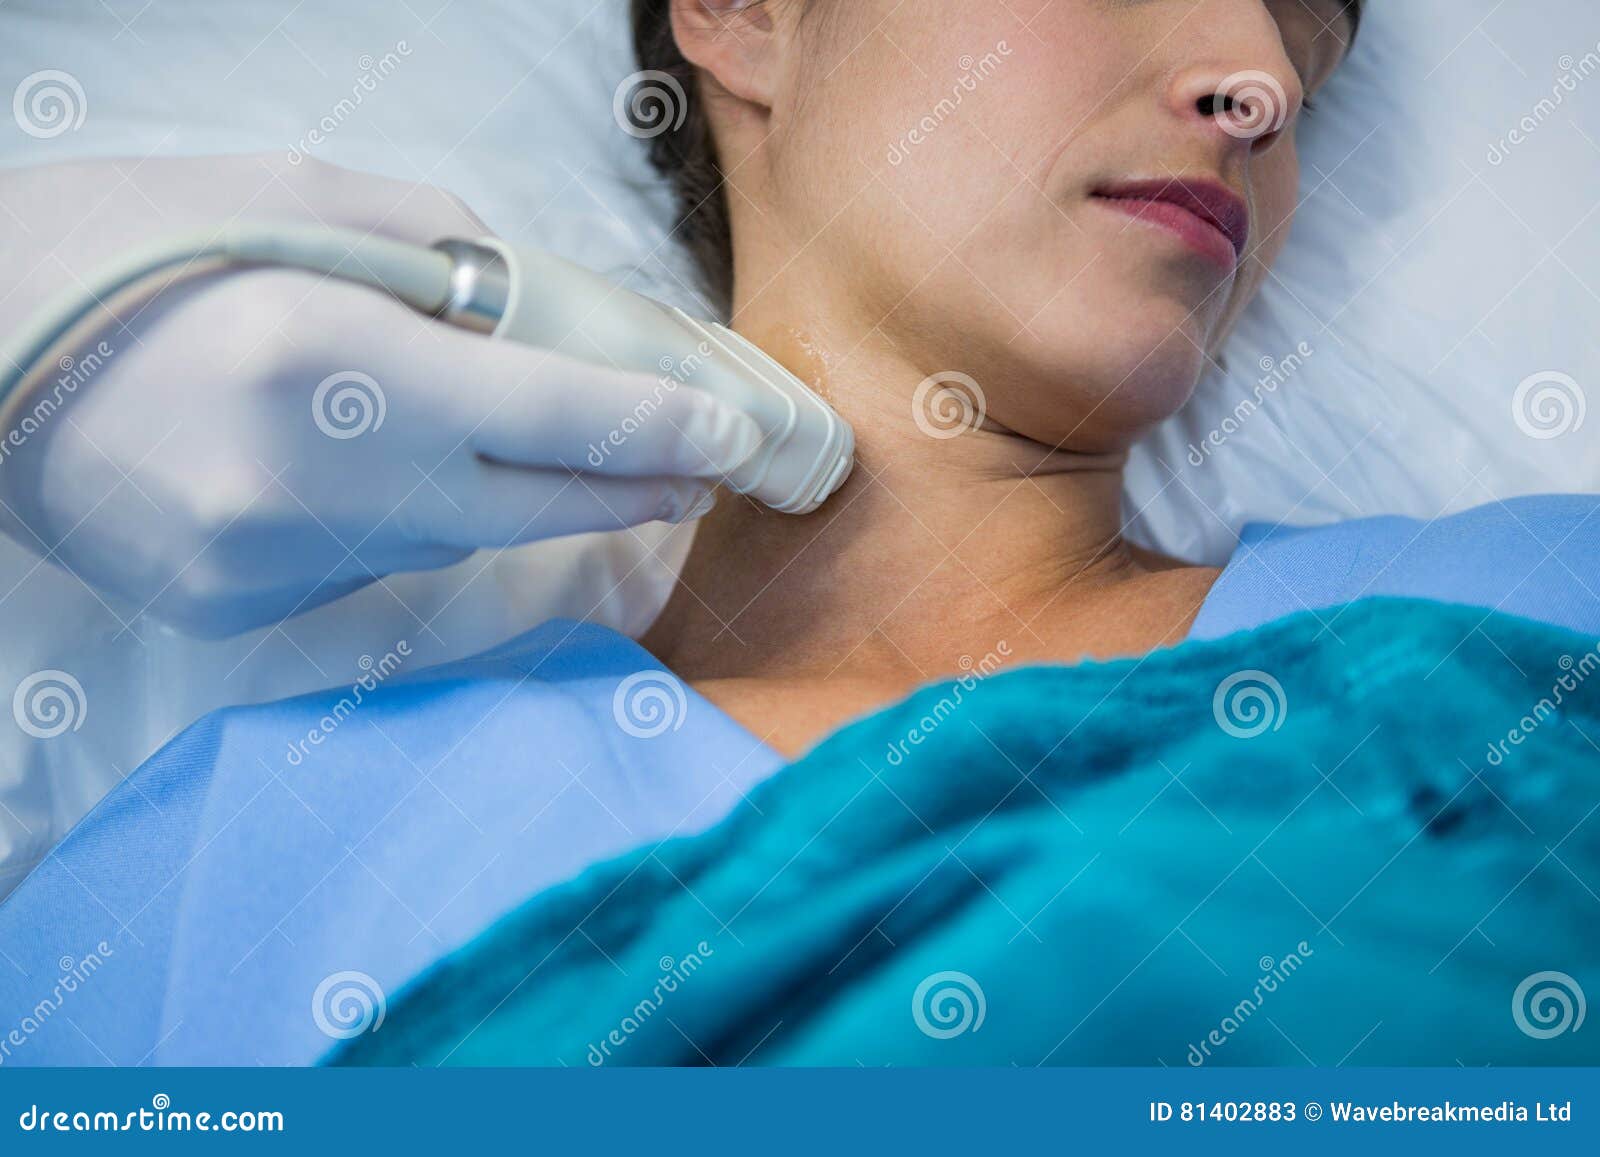 doctors performing a doppler sonography on patient